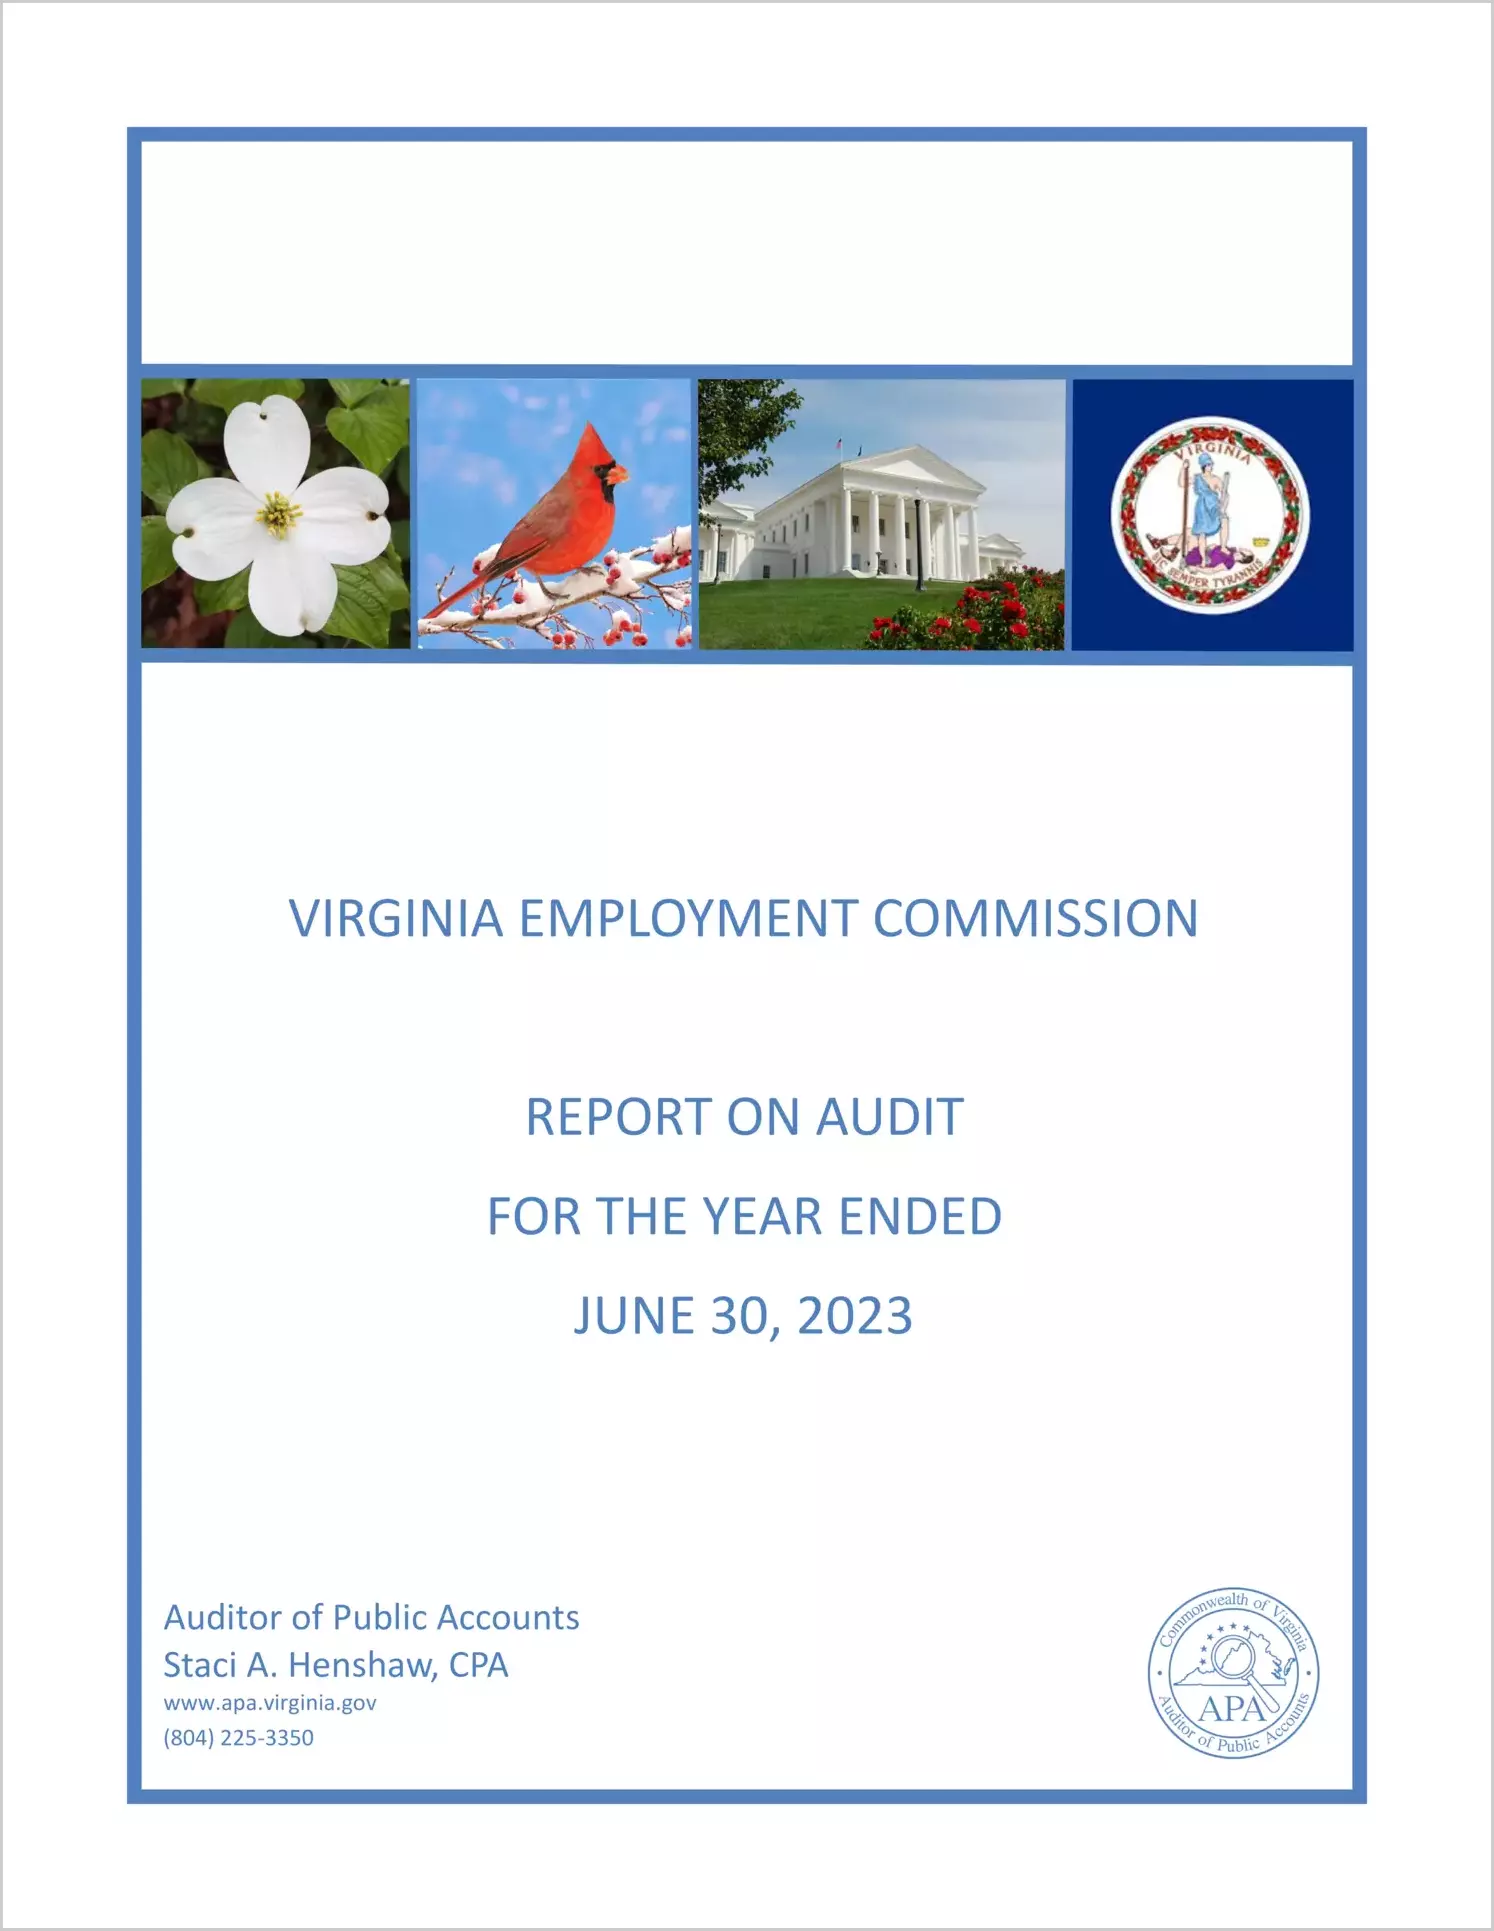 Virginia Employment Commission for the year ended June 30, 2023